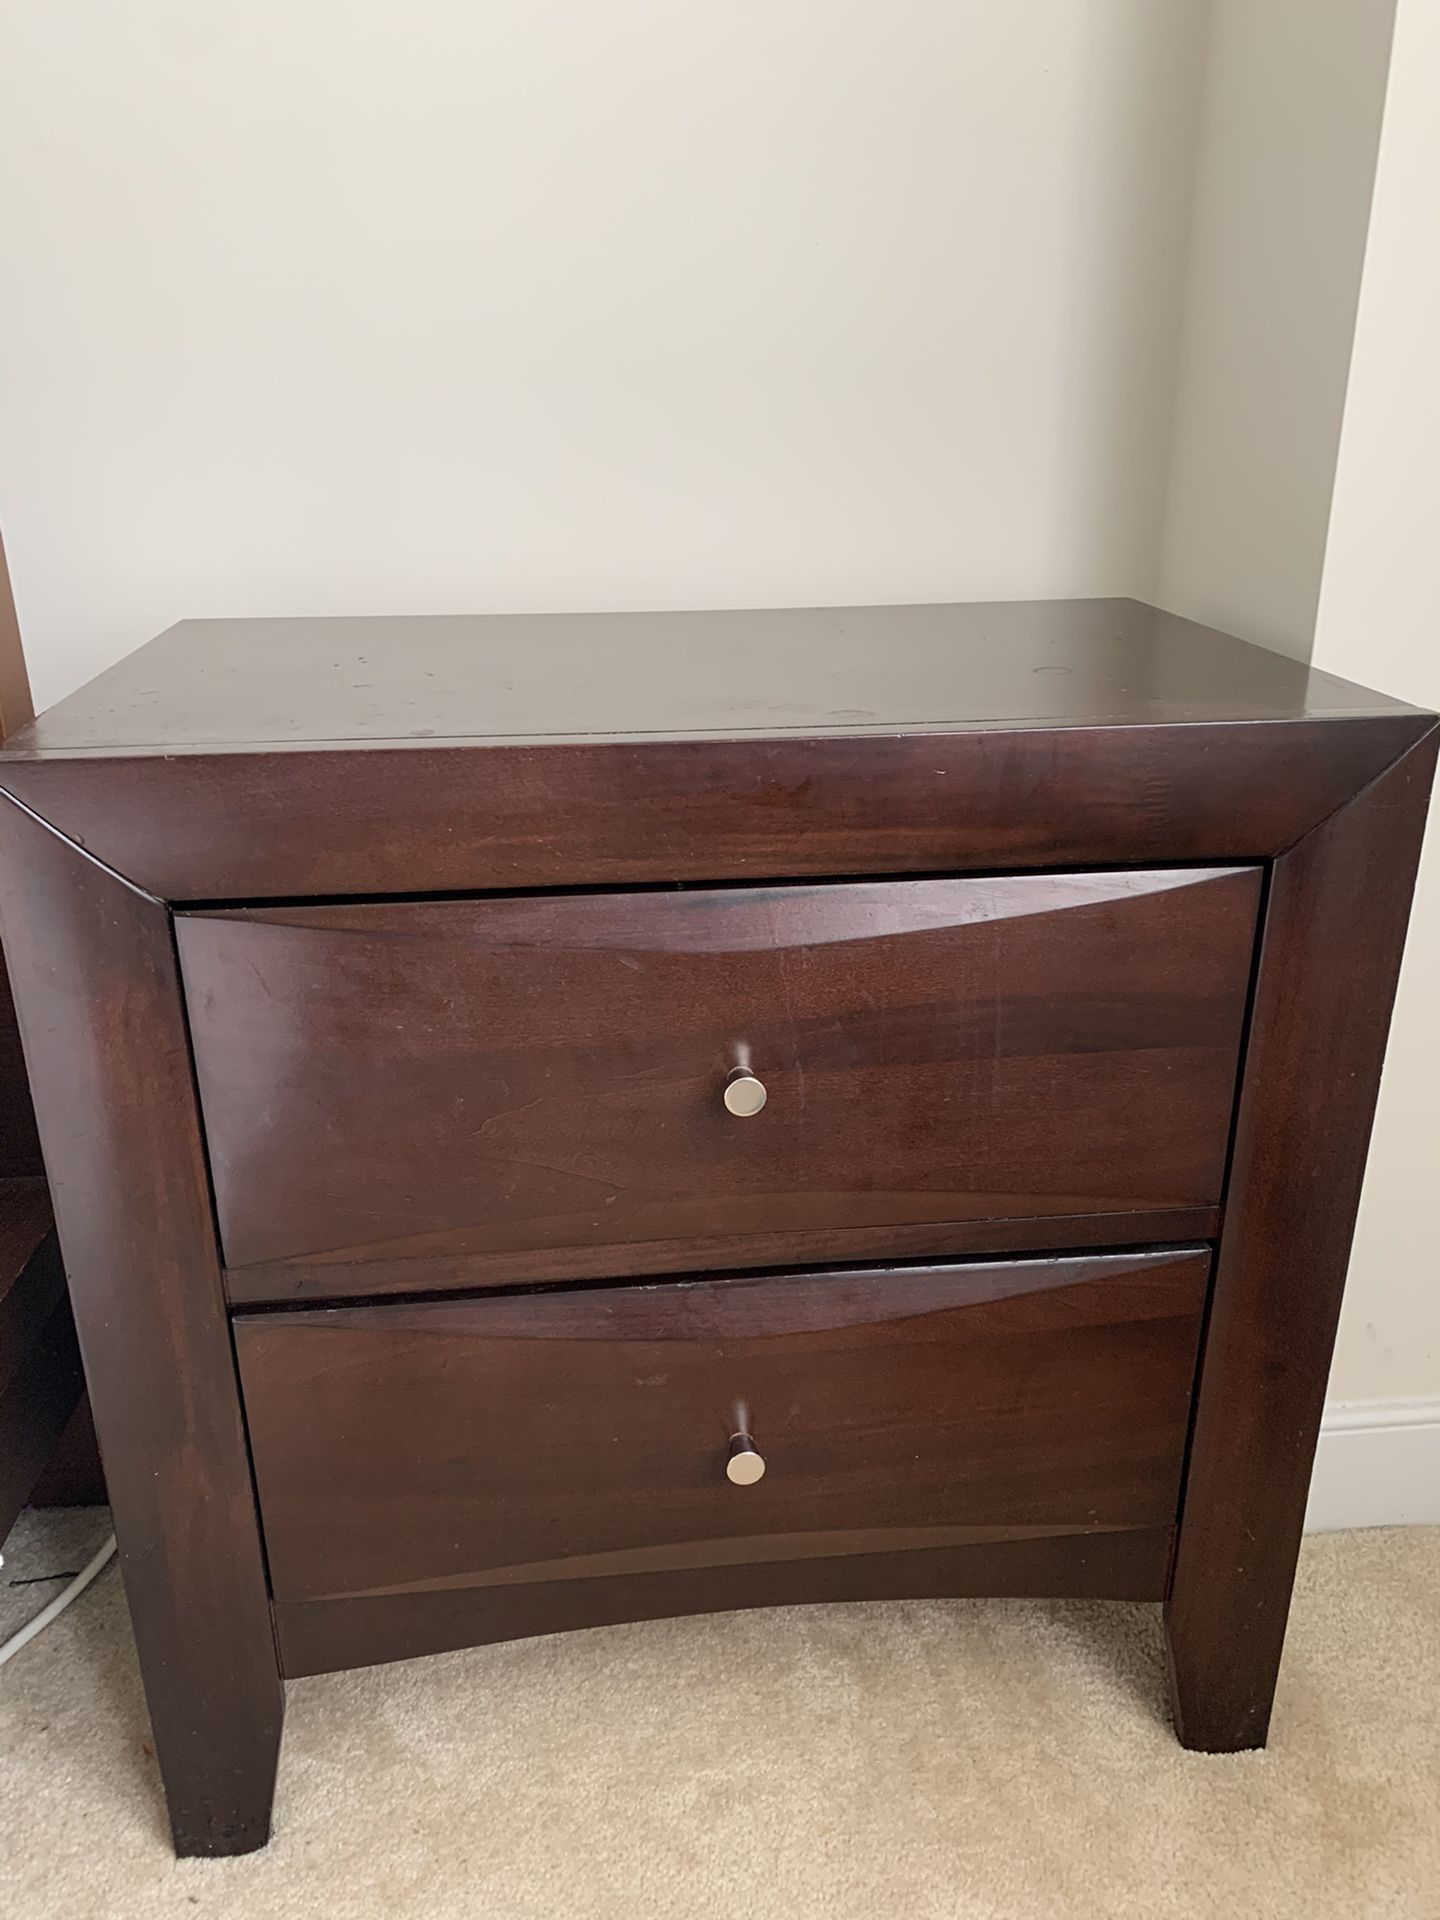 ATTRACTIVE - Walnut 2 Drawer Nightstand/Bedside Table (Real Wood!)